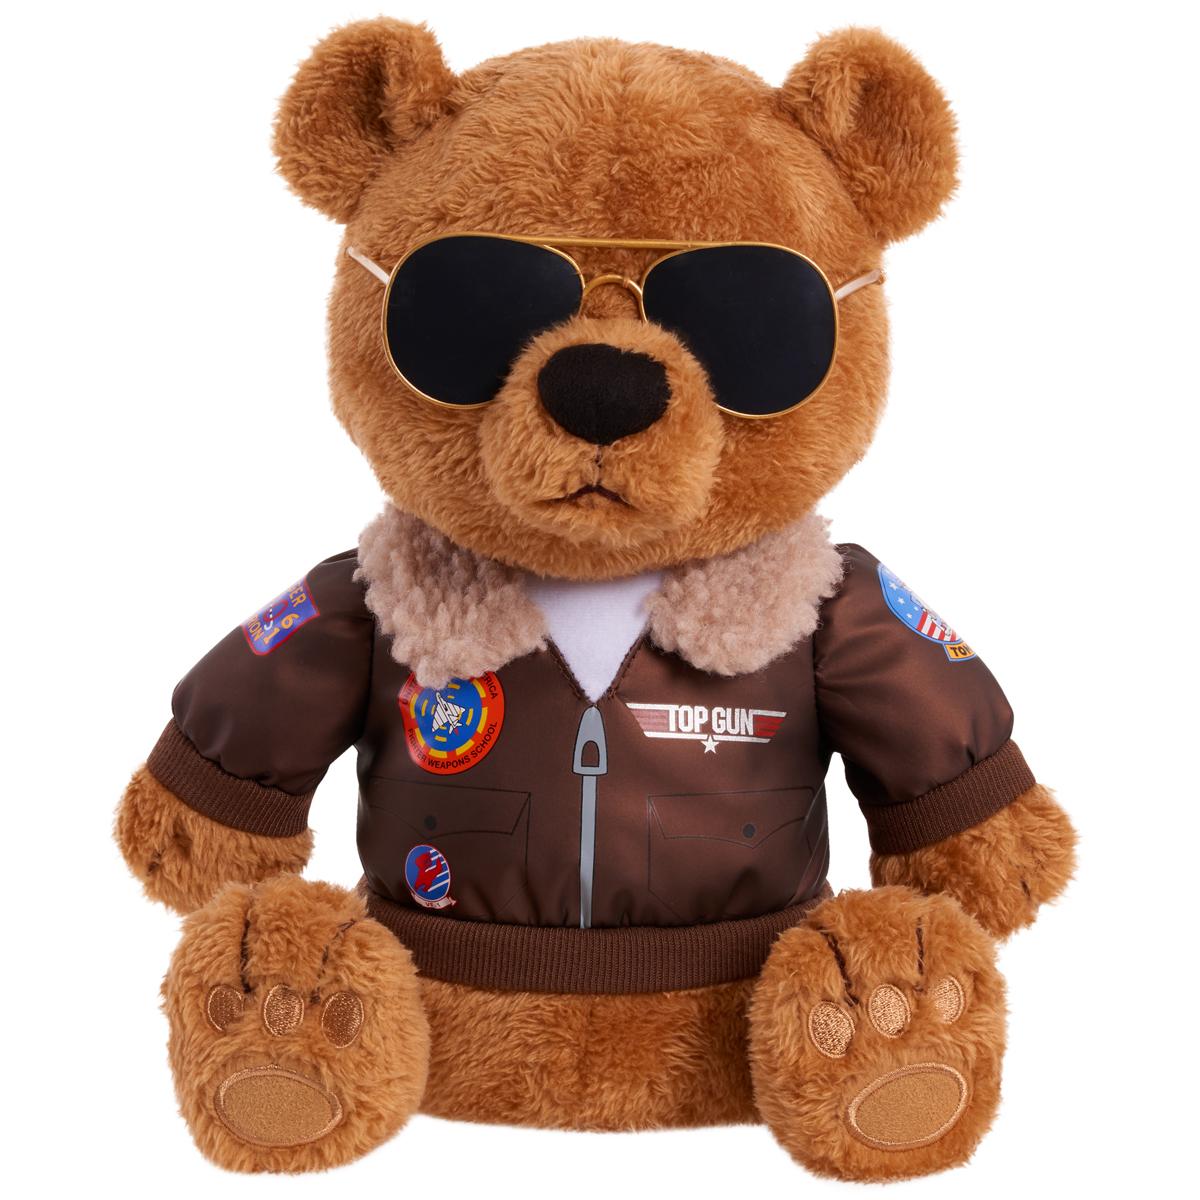 10in Just Play Top Gun Musical Plush Teddy Bear Toy for $8.99